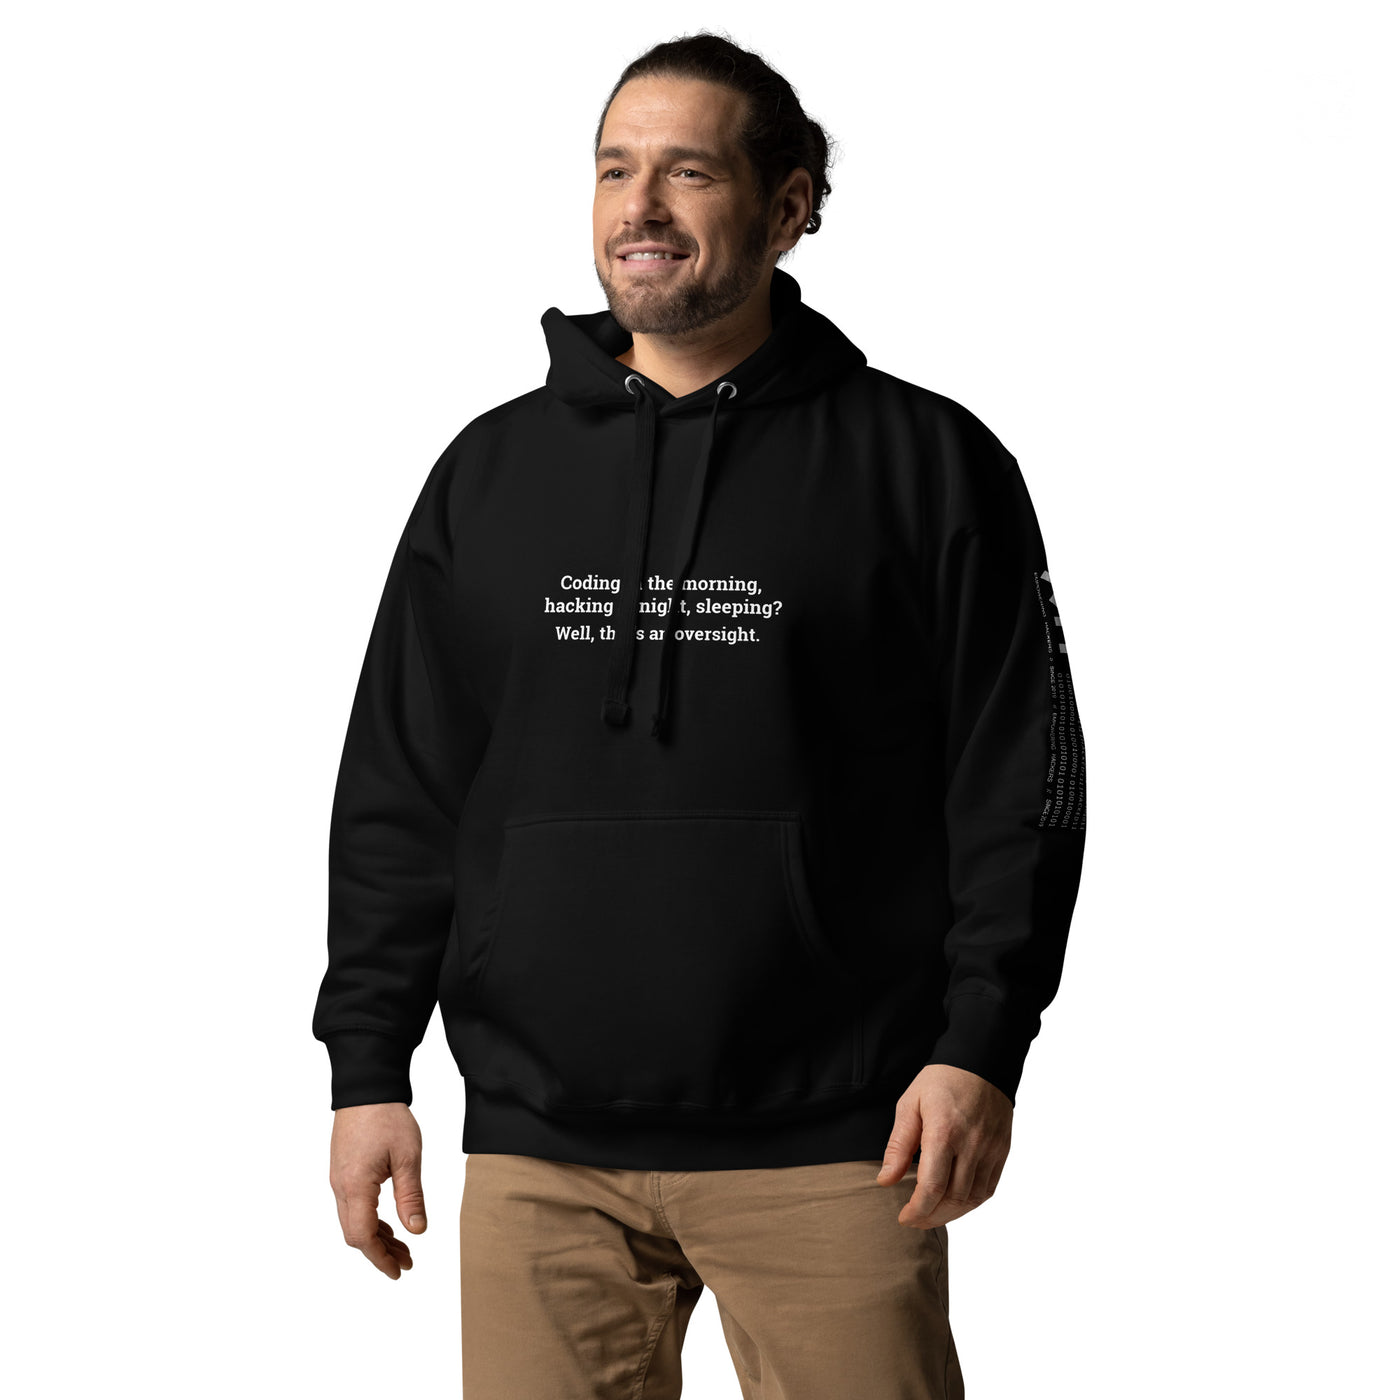 Coding in the morning, hacking at night - Unisex Hoodie